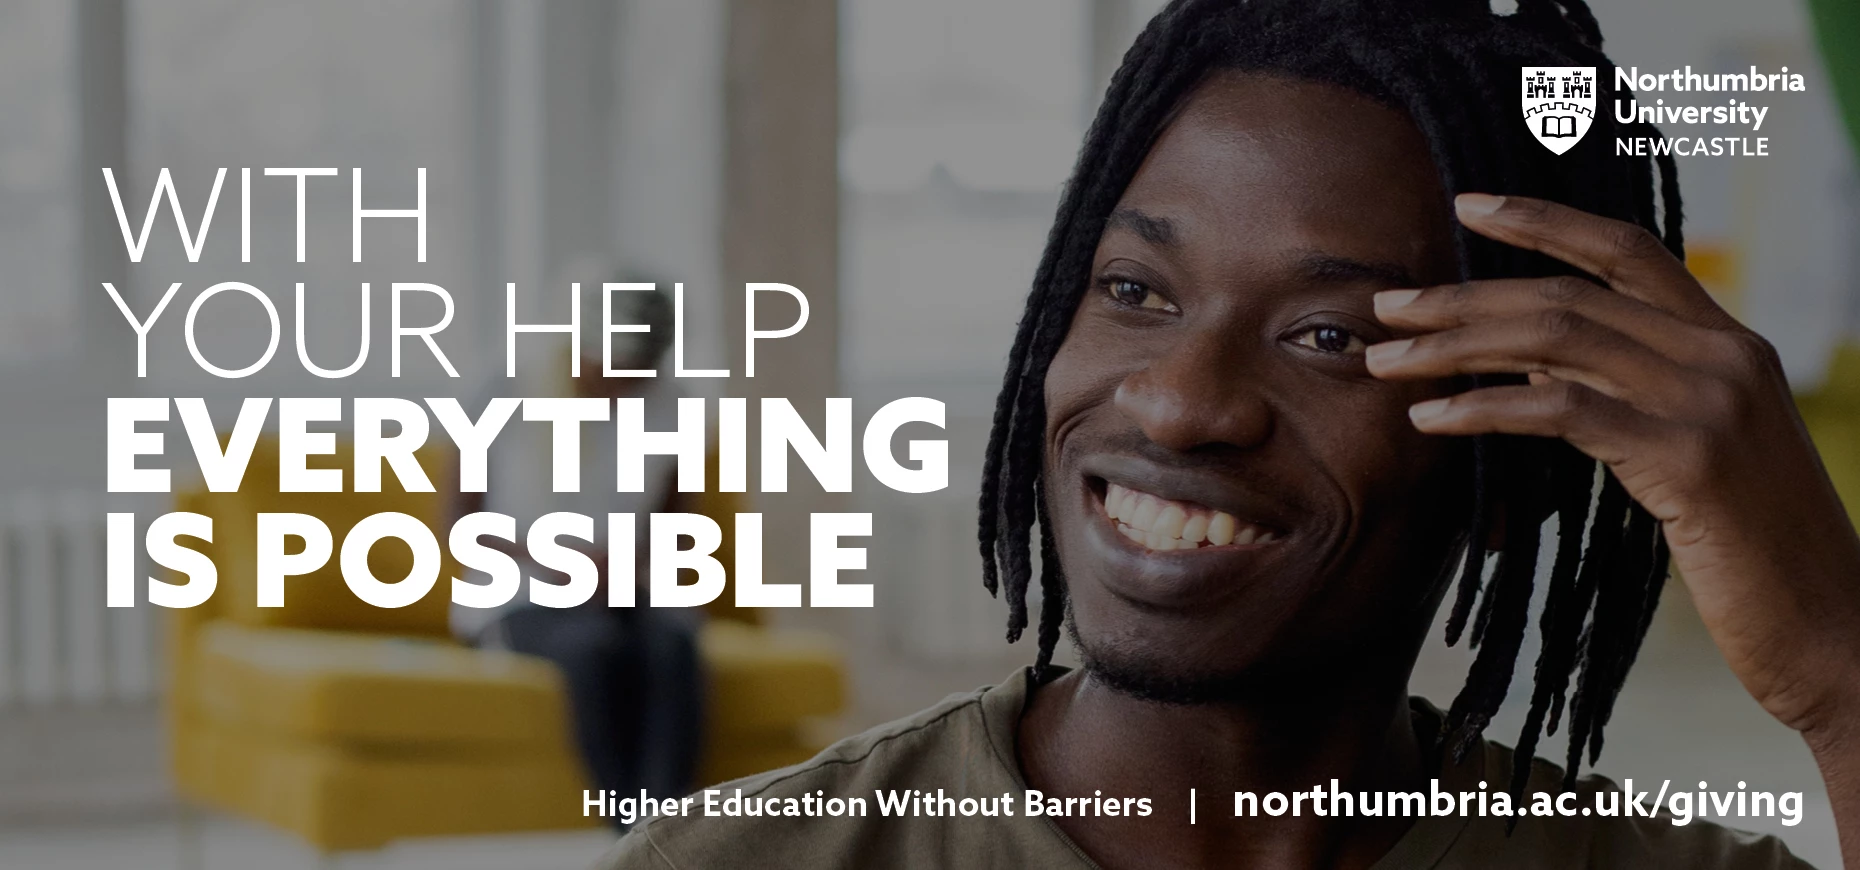 Smiling man looking towards tagline; with your help everything is possible